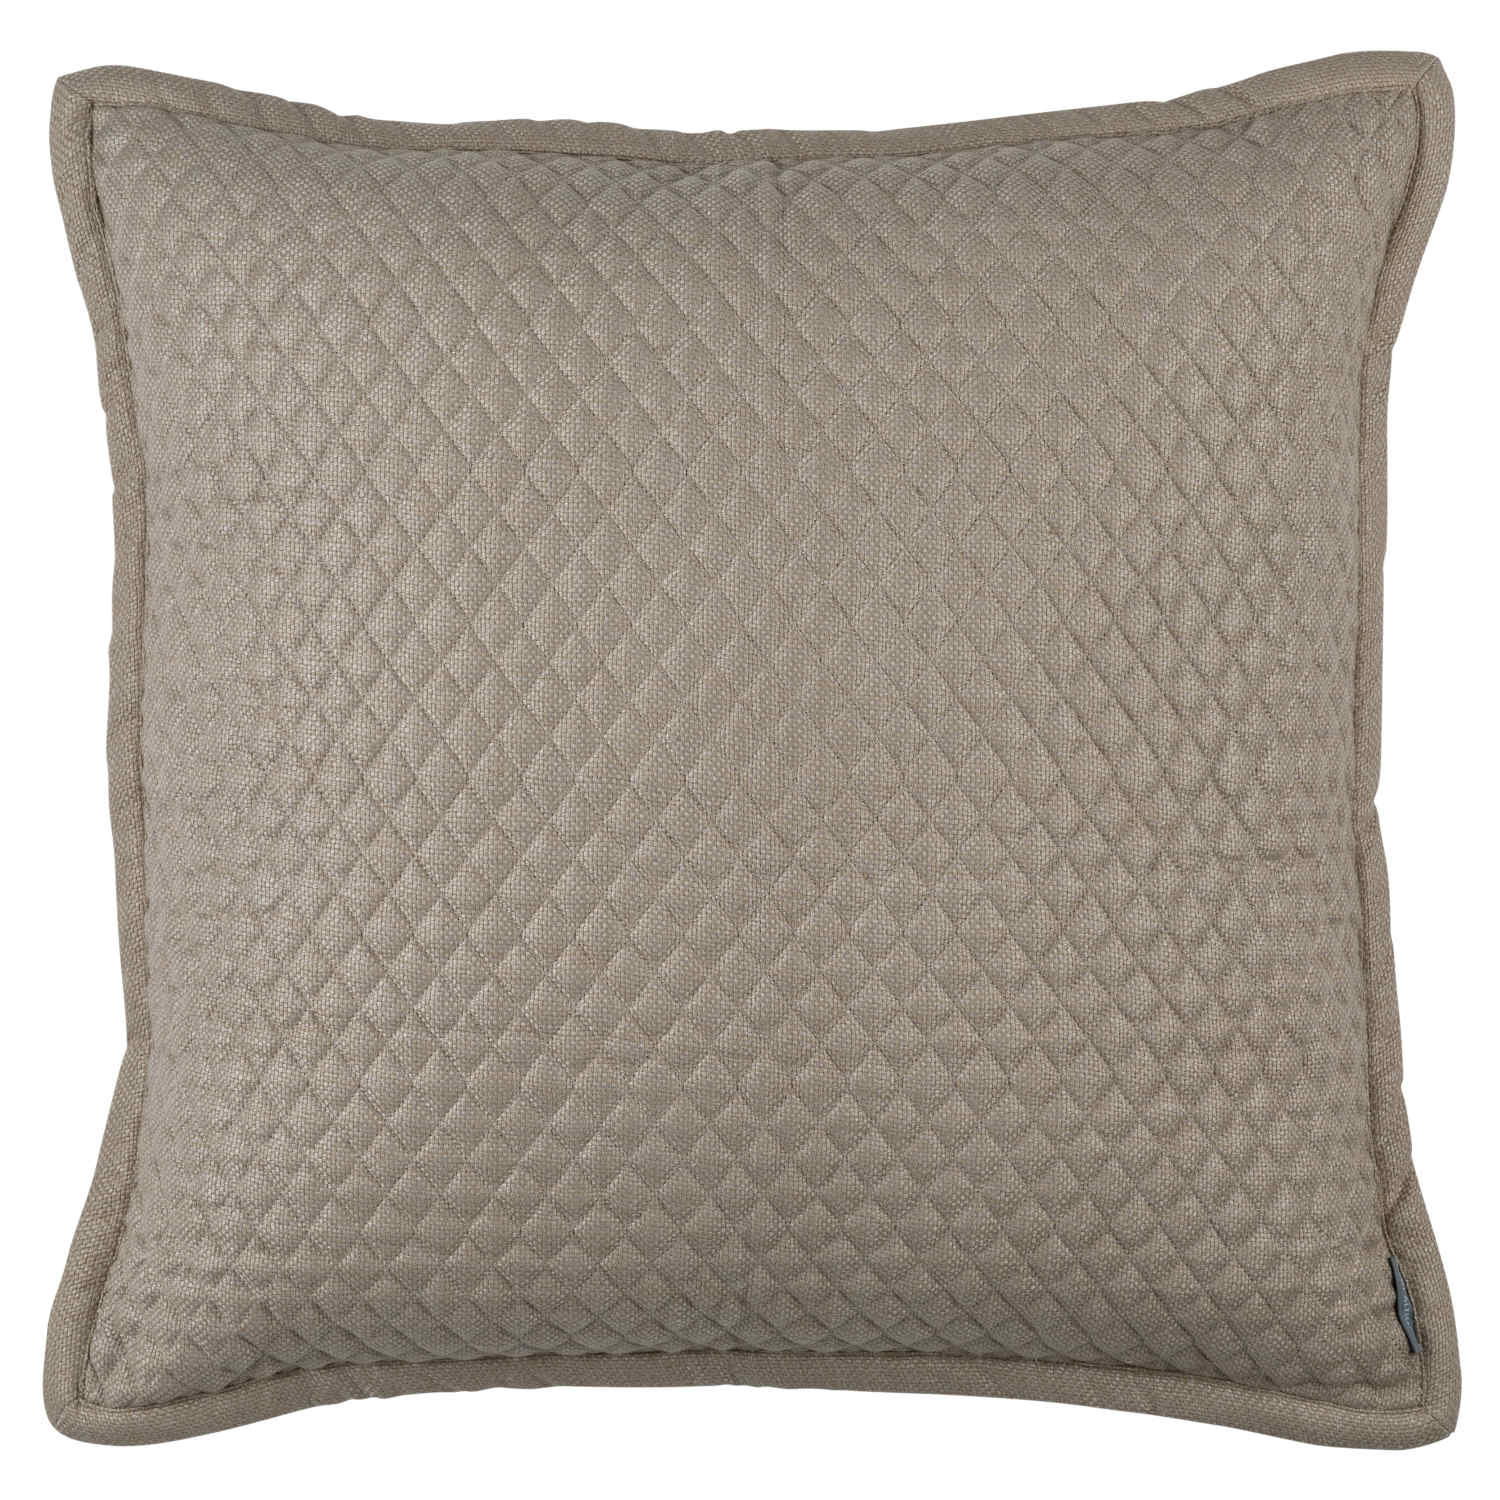 Lili Alessandra Laurie Quilted and Solid Stone Bedding